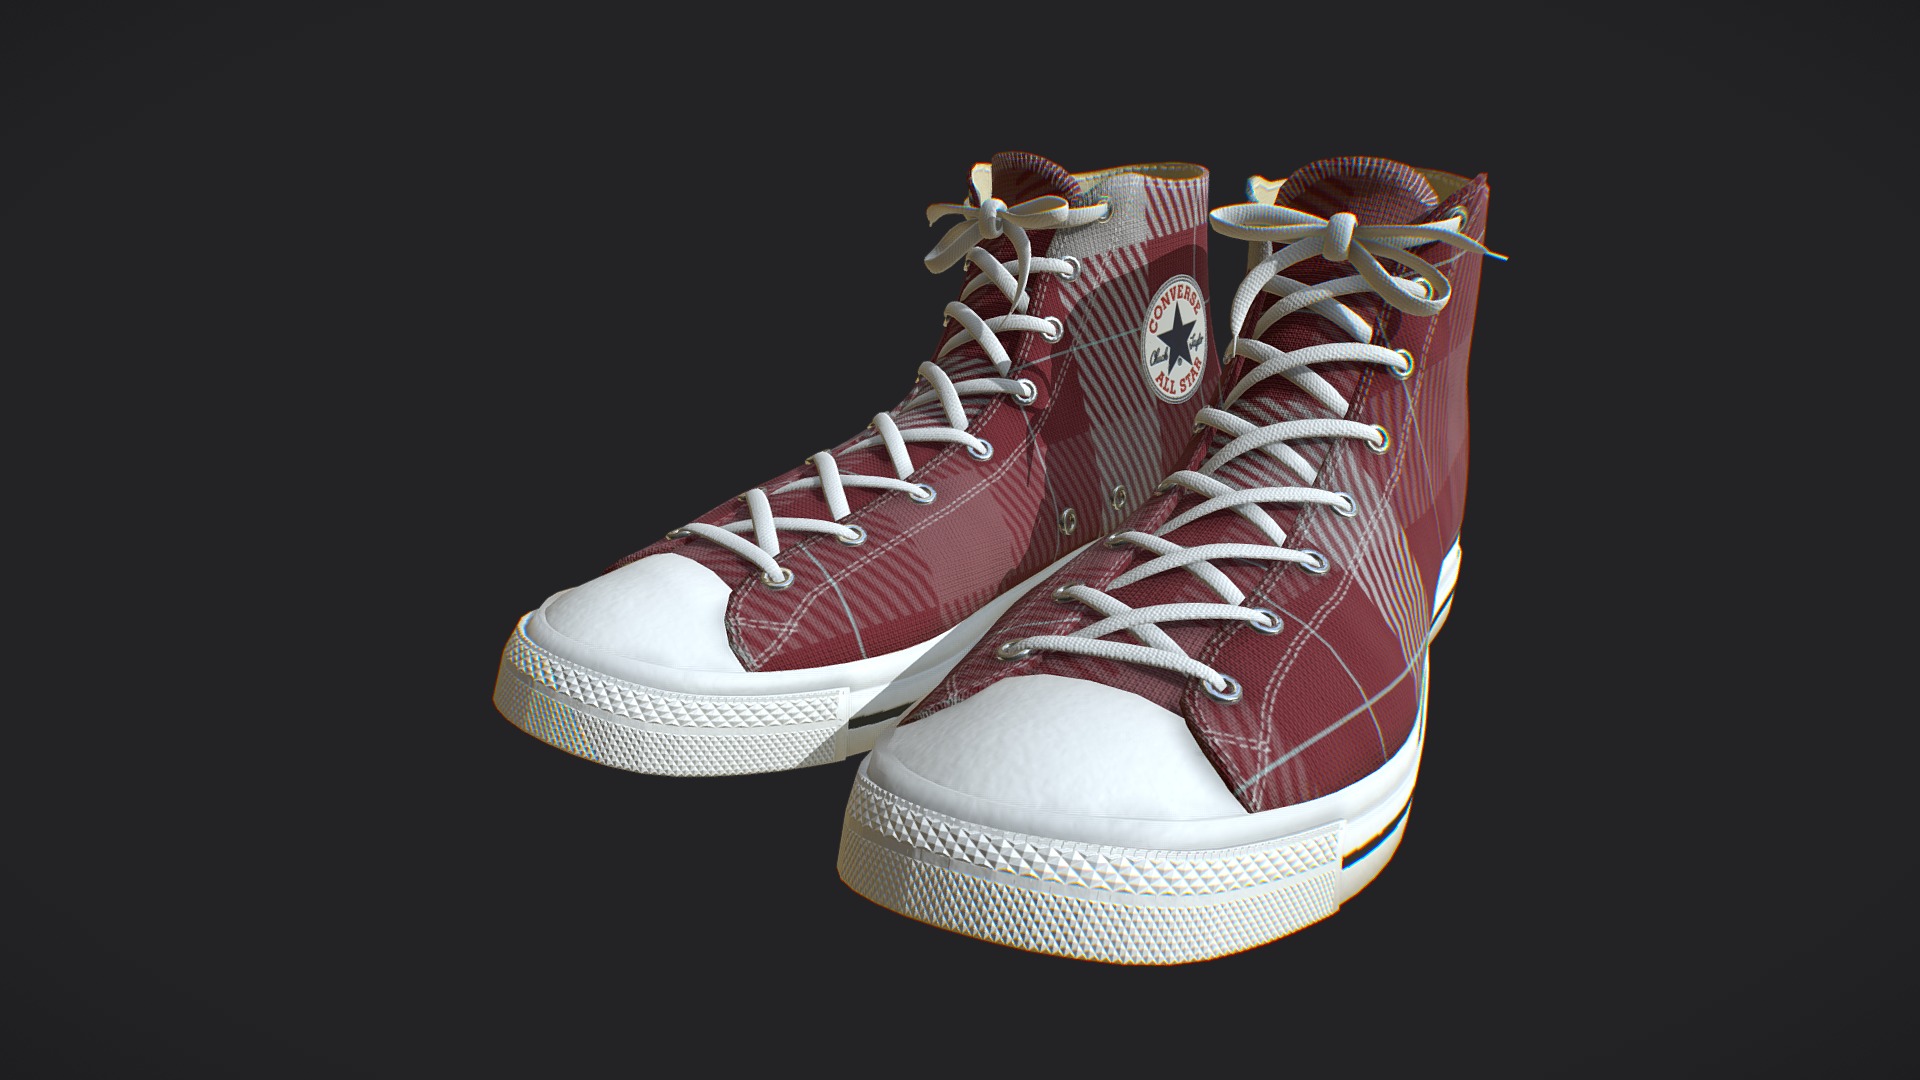 3D model Classic High Top Converse All Stars – 17 Colors - This is a 3D model of the Classic High Top Converse All Stars - 17 Colors. The 3D model is about a pair of white and red shoes.